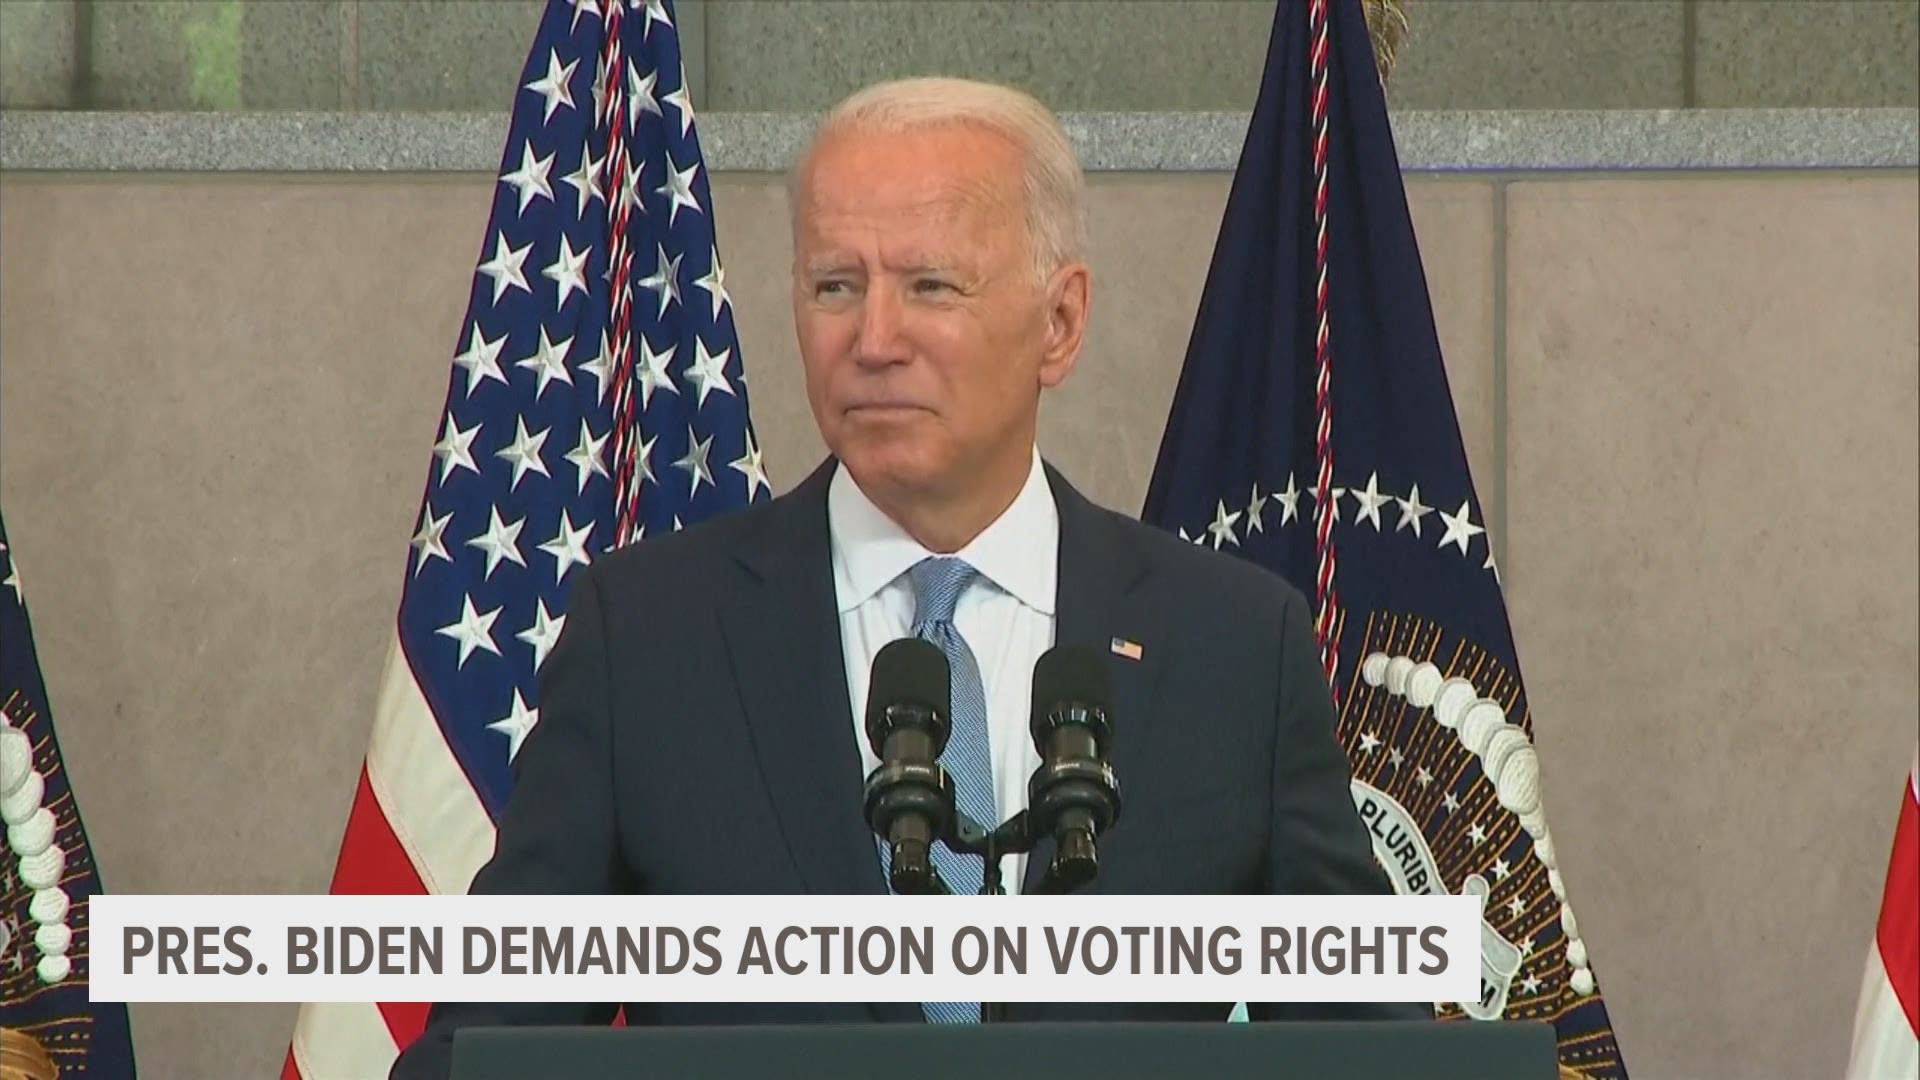 Biden laid out what the White House called “the moral case” for voting rights in a speech in Philadelphia Tuesday afternoon.